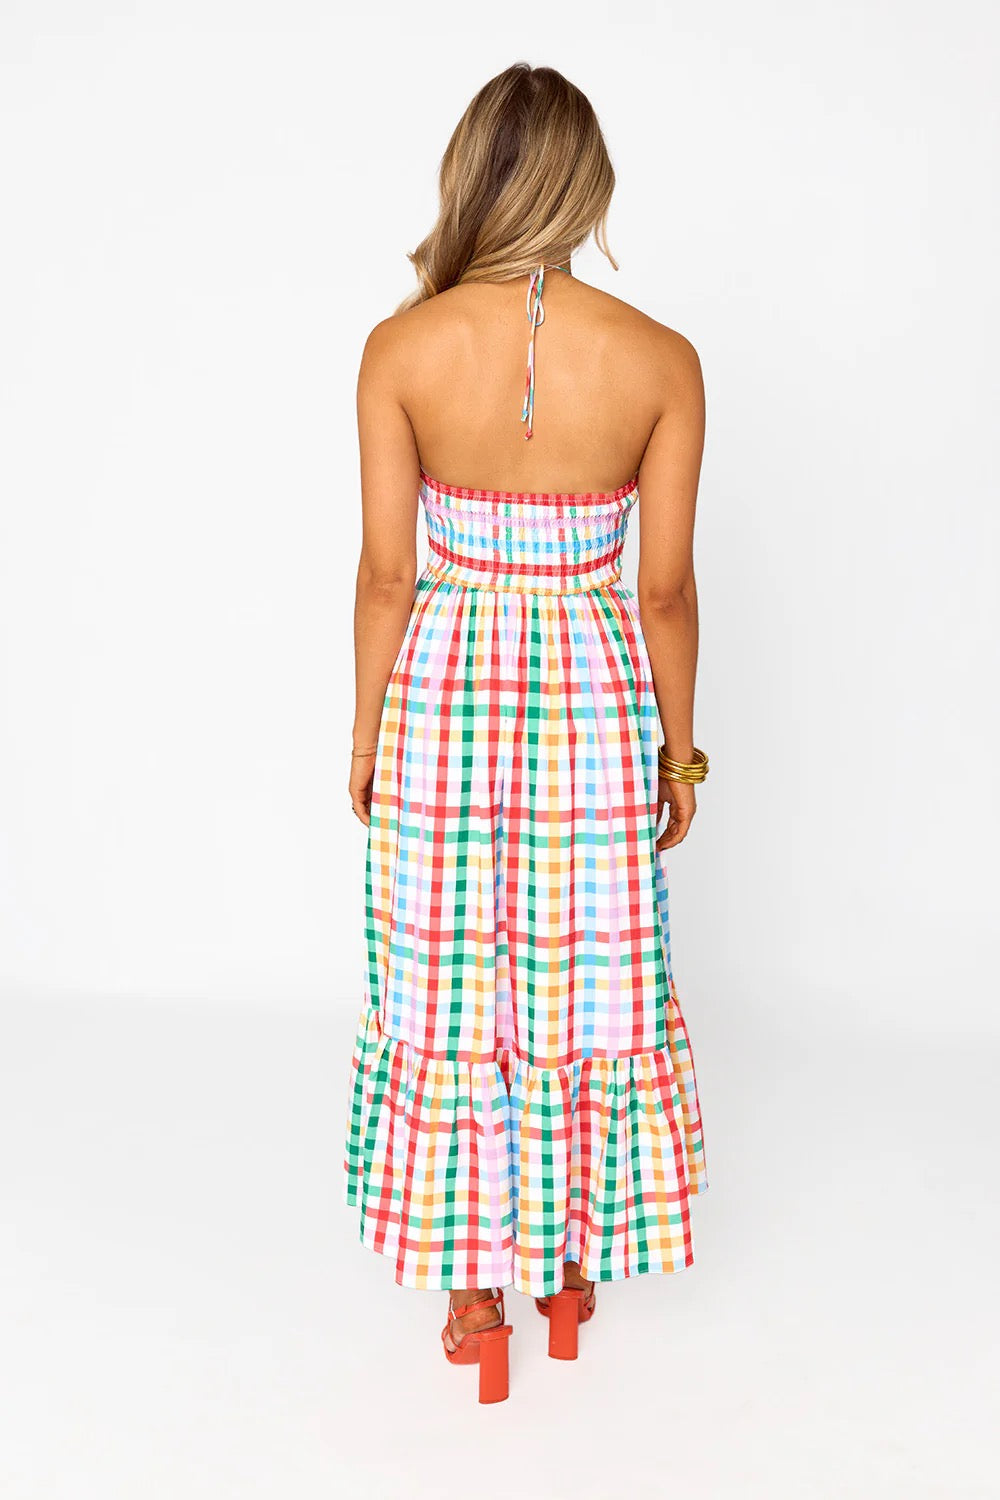 Gerty Halter Midi Dress-Daybreak-Dresses-Buddy Love-Shop with Bloom West Boutique, Women's Fashion Boutique, Located in Houma, Louisiana